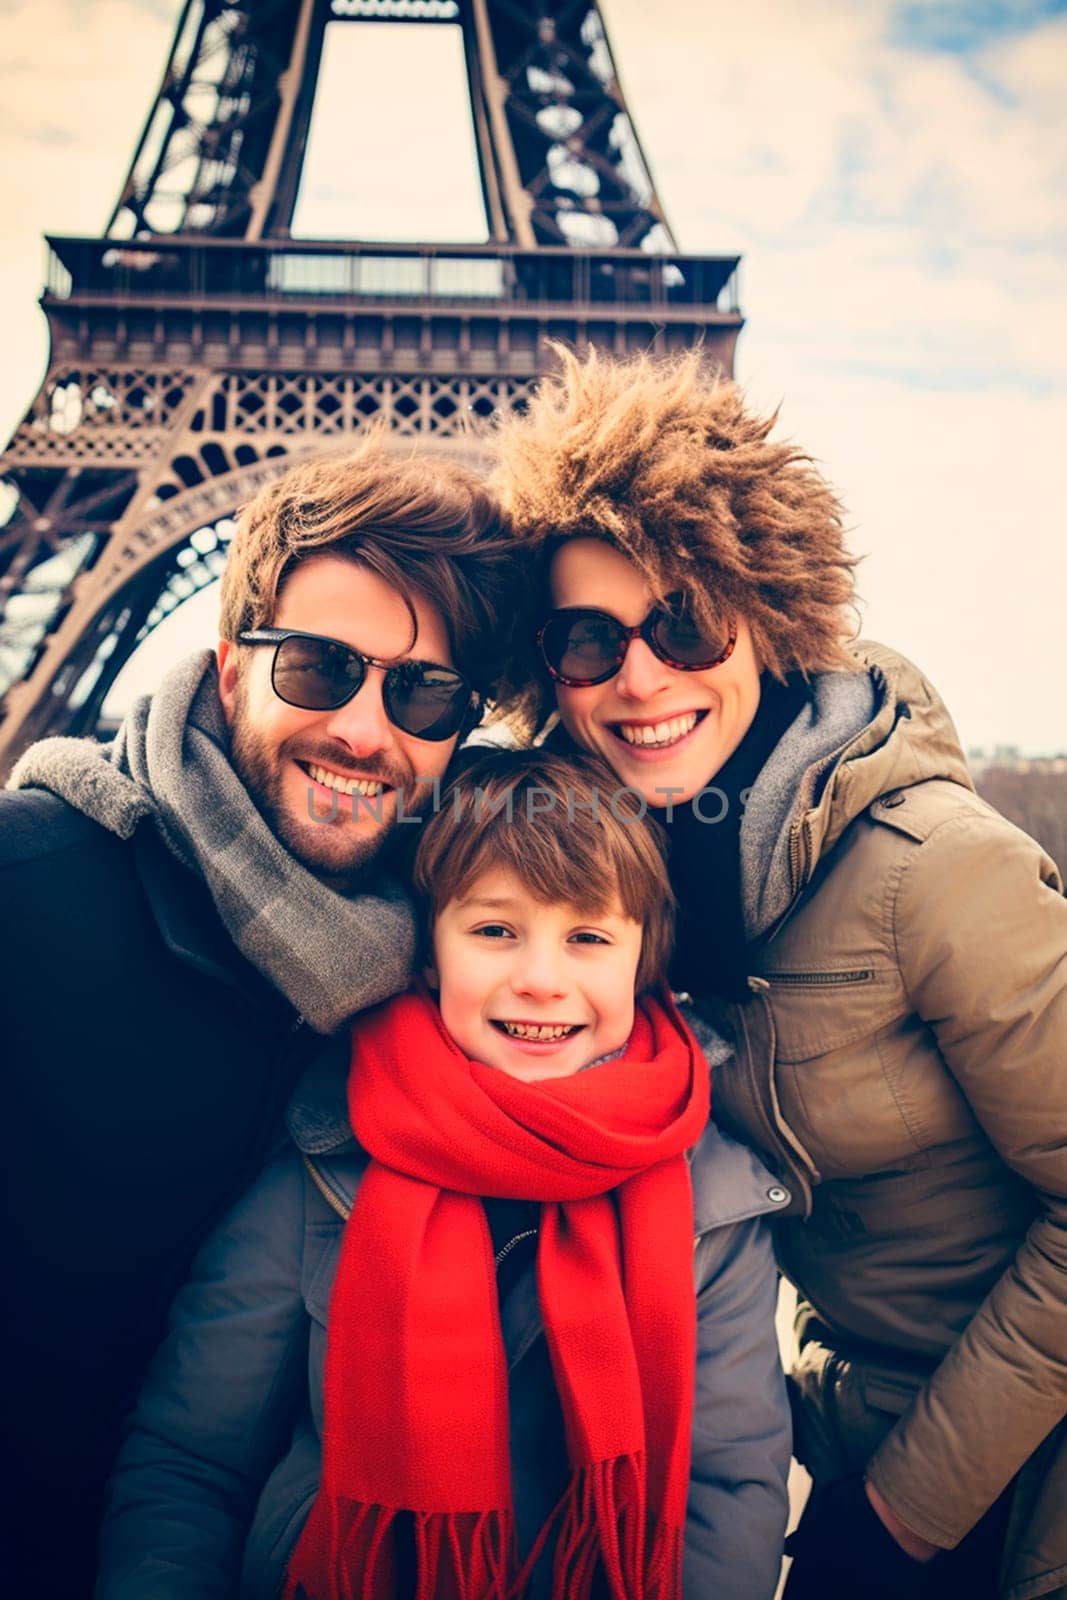 Happy family together in Paris. Selective focus. Love.